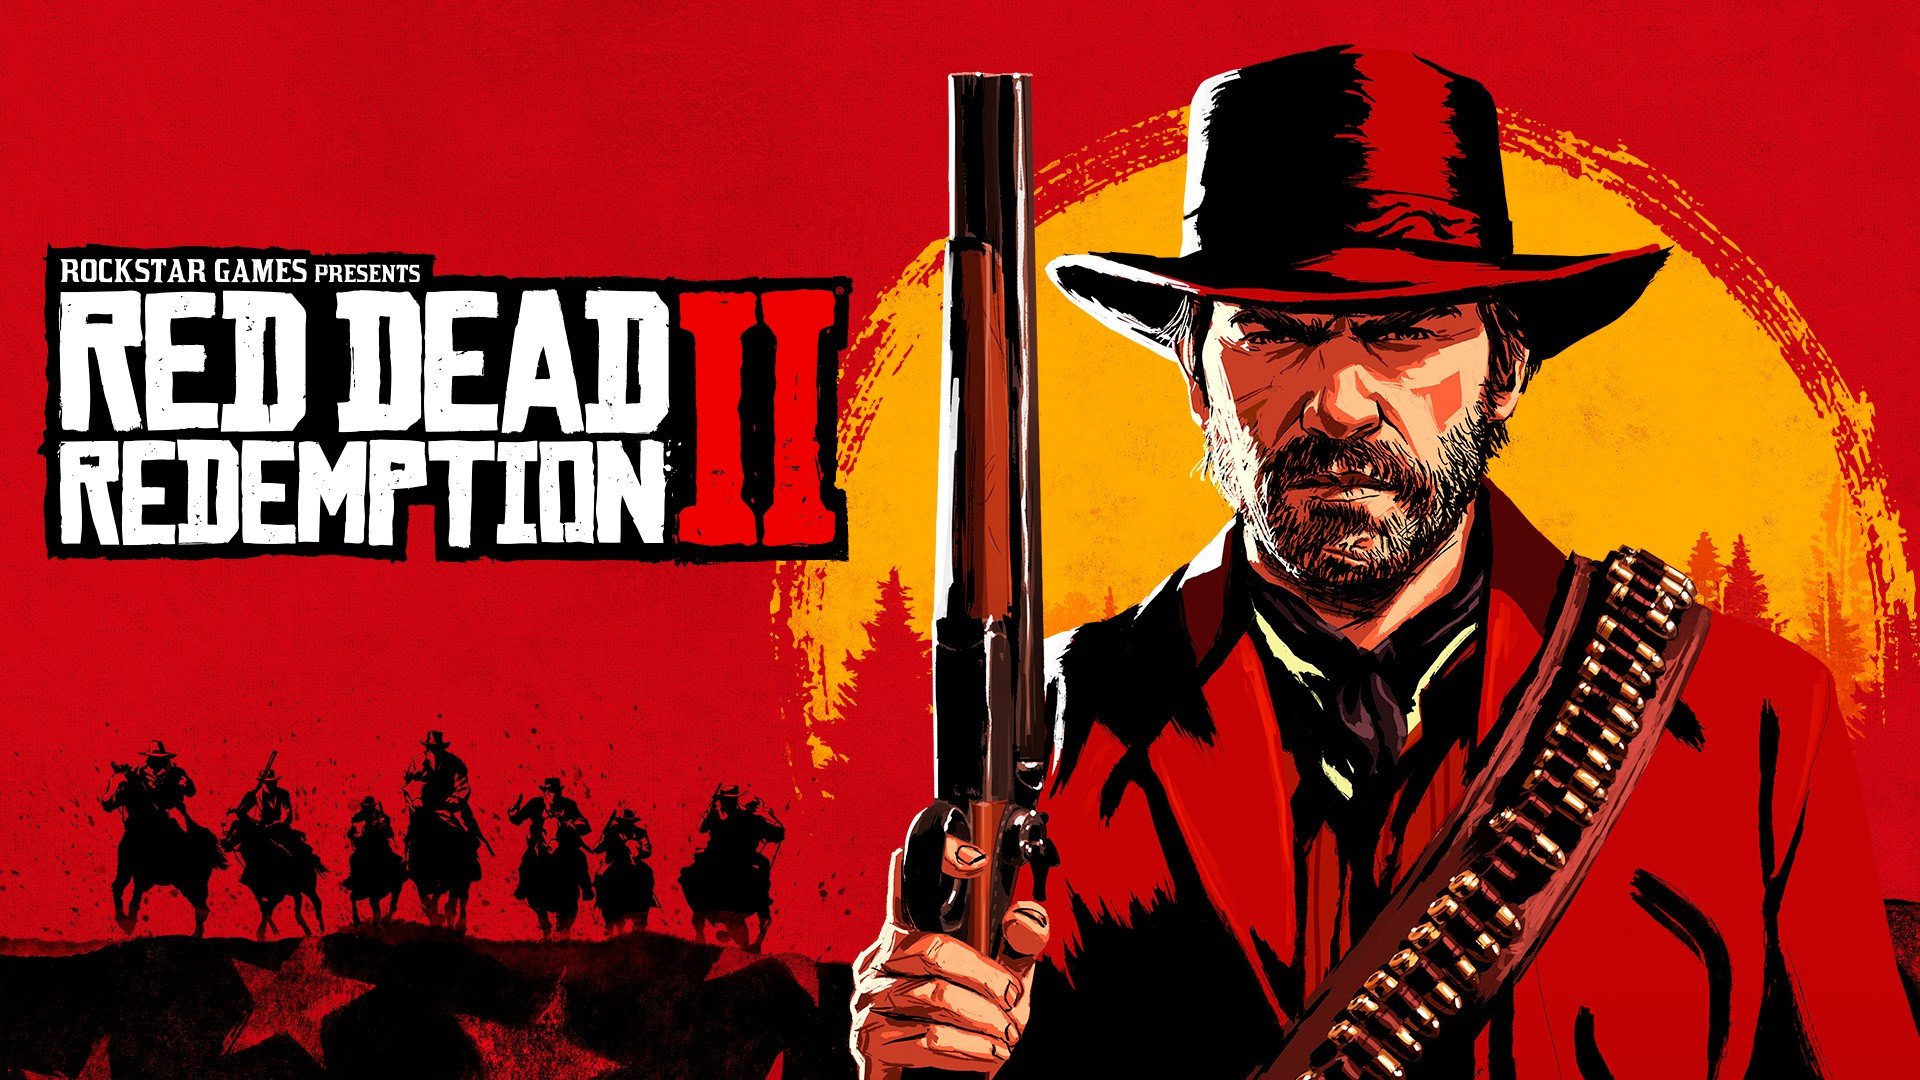 gta v and red dead redemption 2 sales